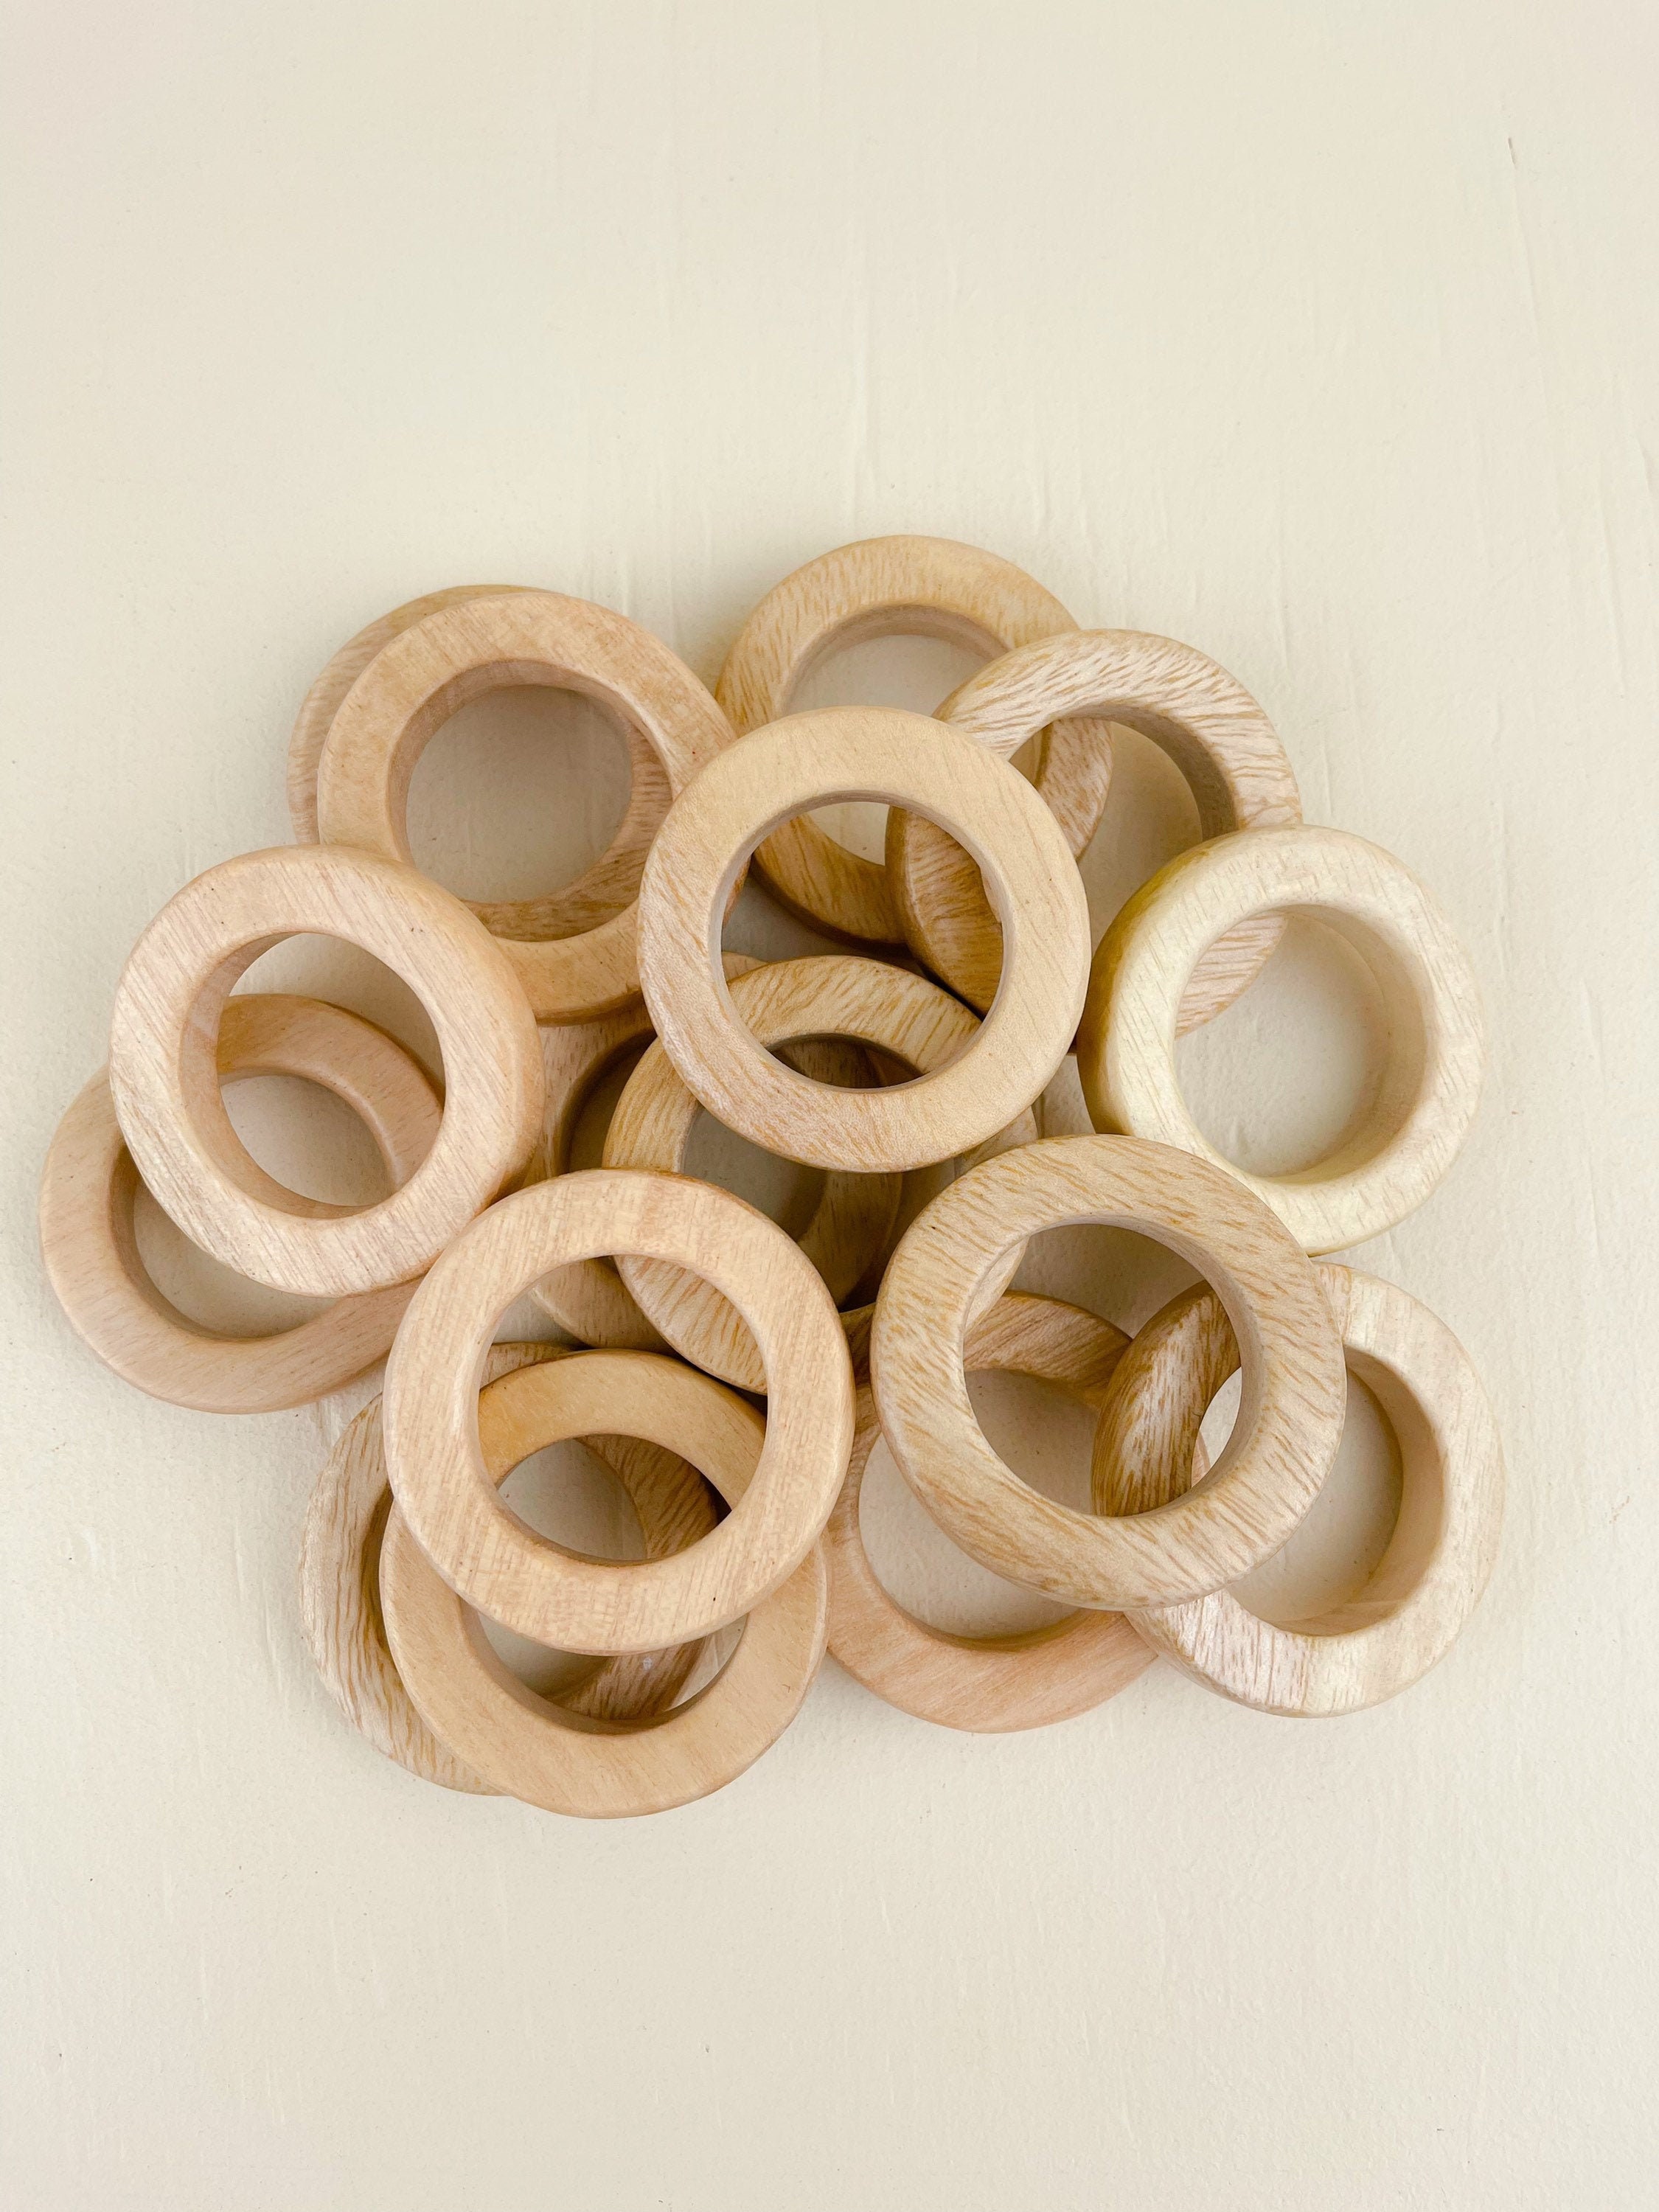 Dream Lifestyle 12 PCS Wooden Rings, Macrame Wooden Rings, Natural  Unfinished Solid Wood Rings for DIY Craft Pendant Connectors Ring Jewelry  Making 5 Sizes 